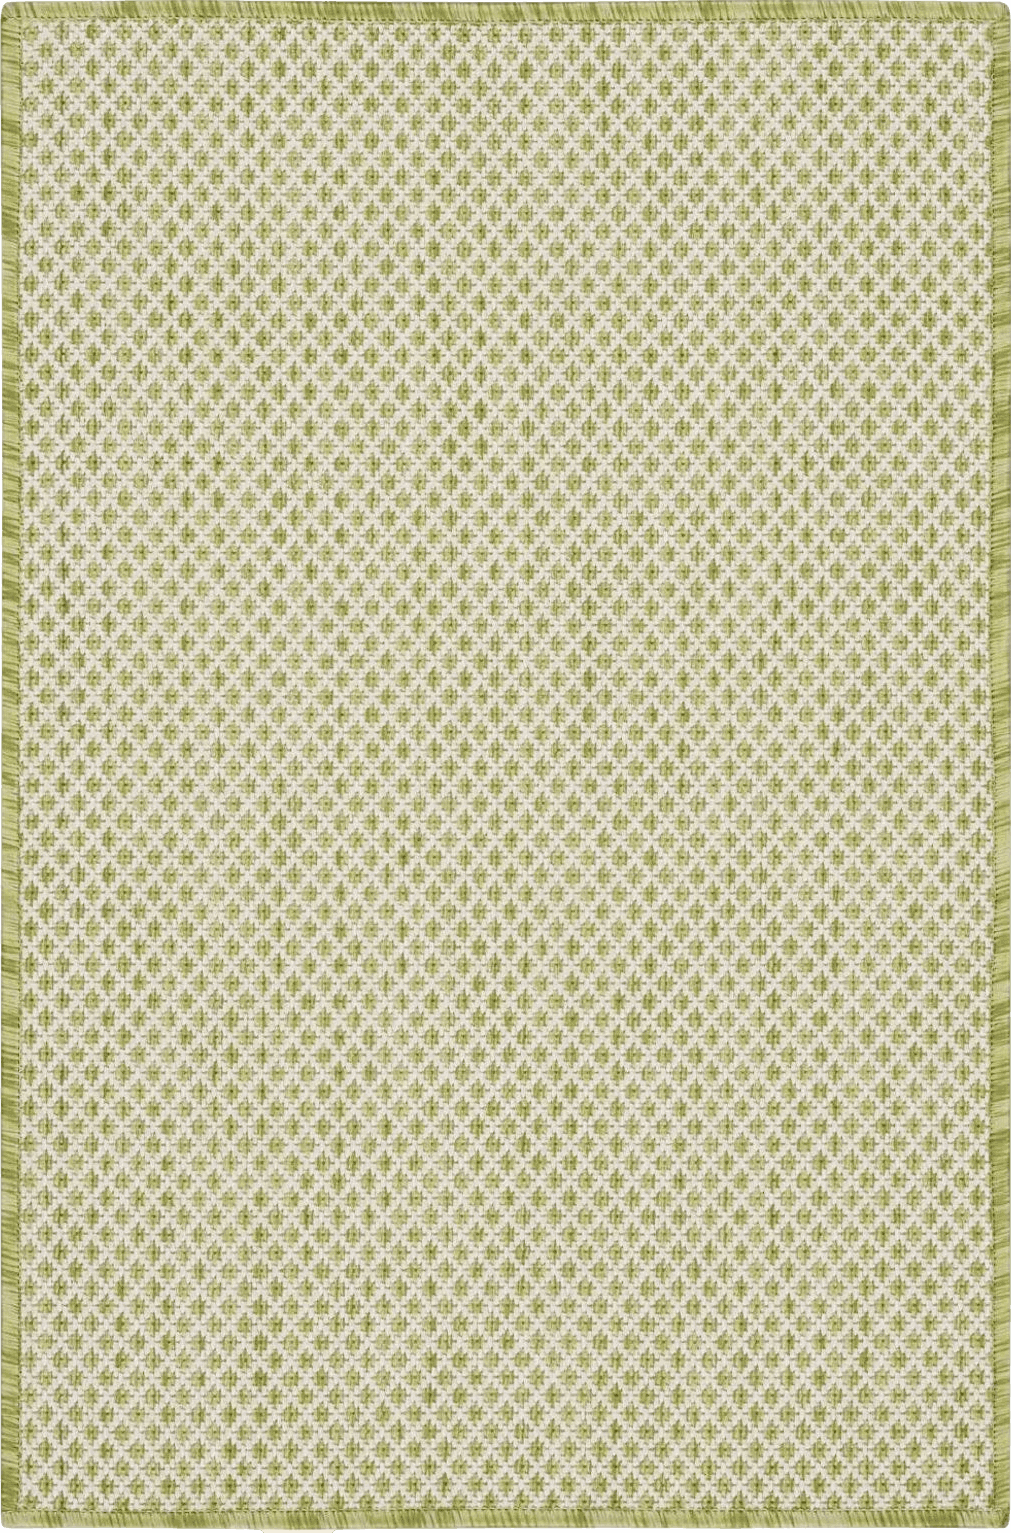 Nourison Courtyard Indoor/Outdoor Ivory Green 2' x 3' Area Rug, Geometric, Easy Cleaning, Non Shedding, Bed Room, Living Room, Dining Room, Deck, Patio, Backyard (2x3)